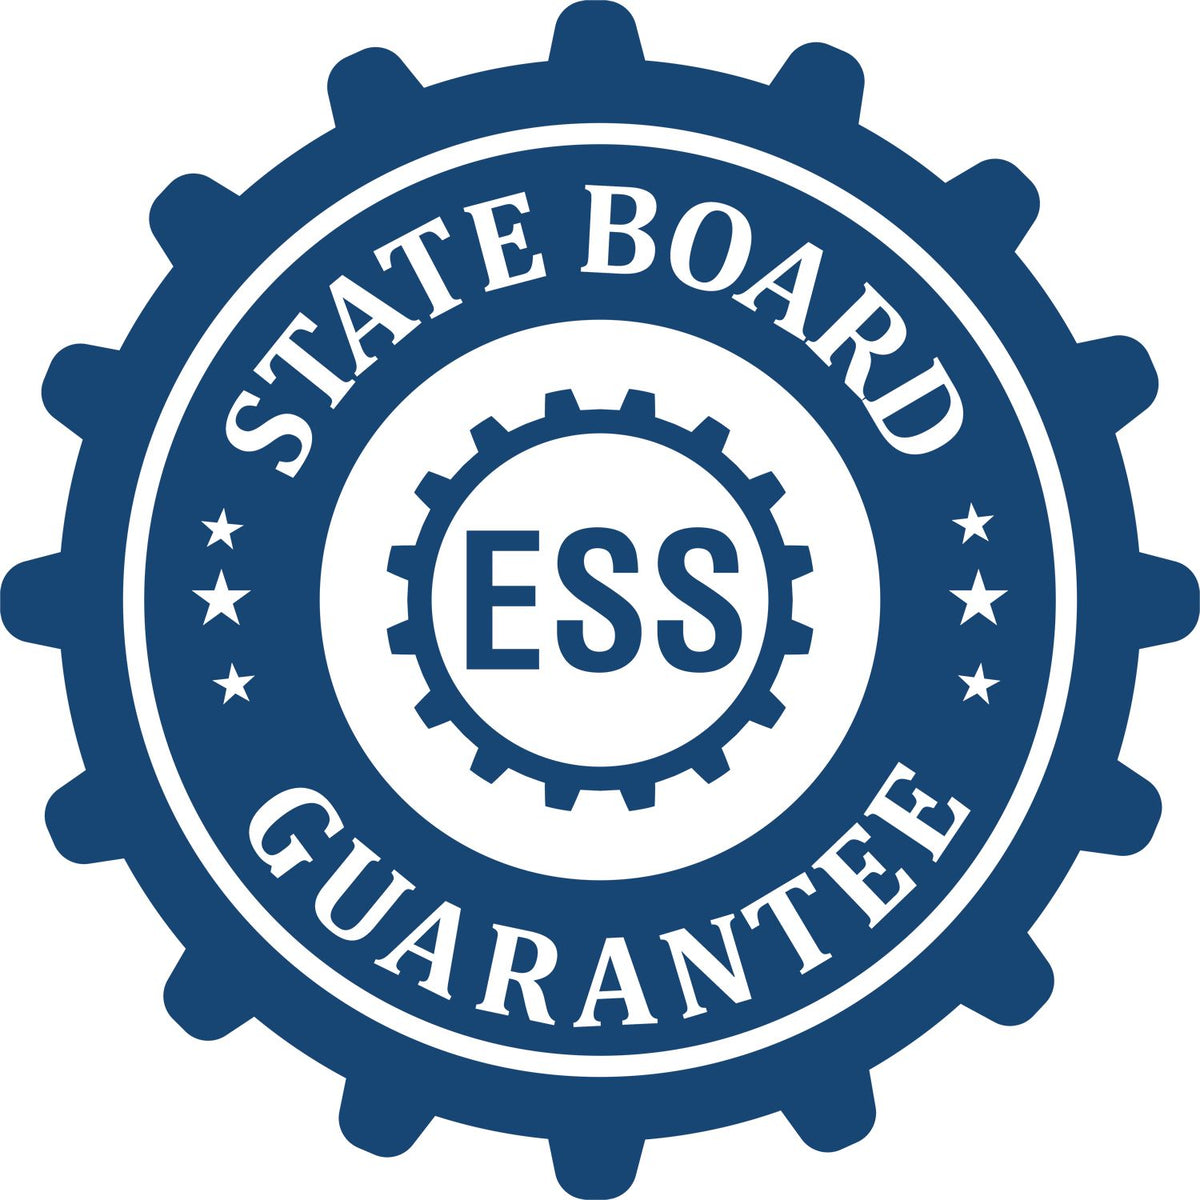 An emblem in a gear shape illustrating a state board guarantee for the Hybrid Nevada Land Surveyor Seal